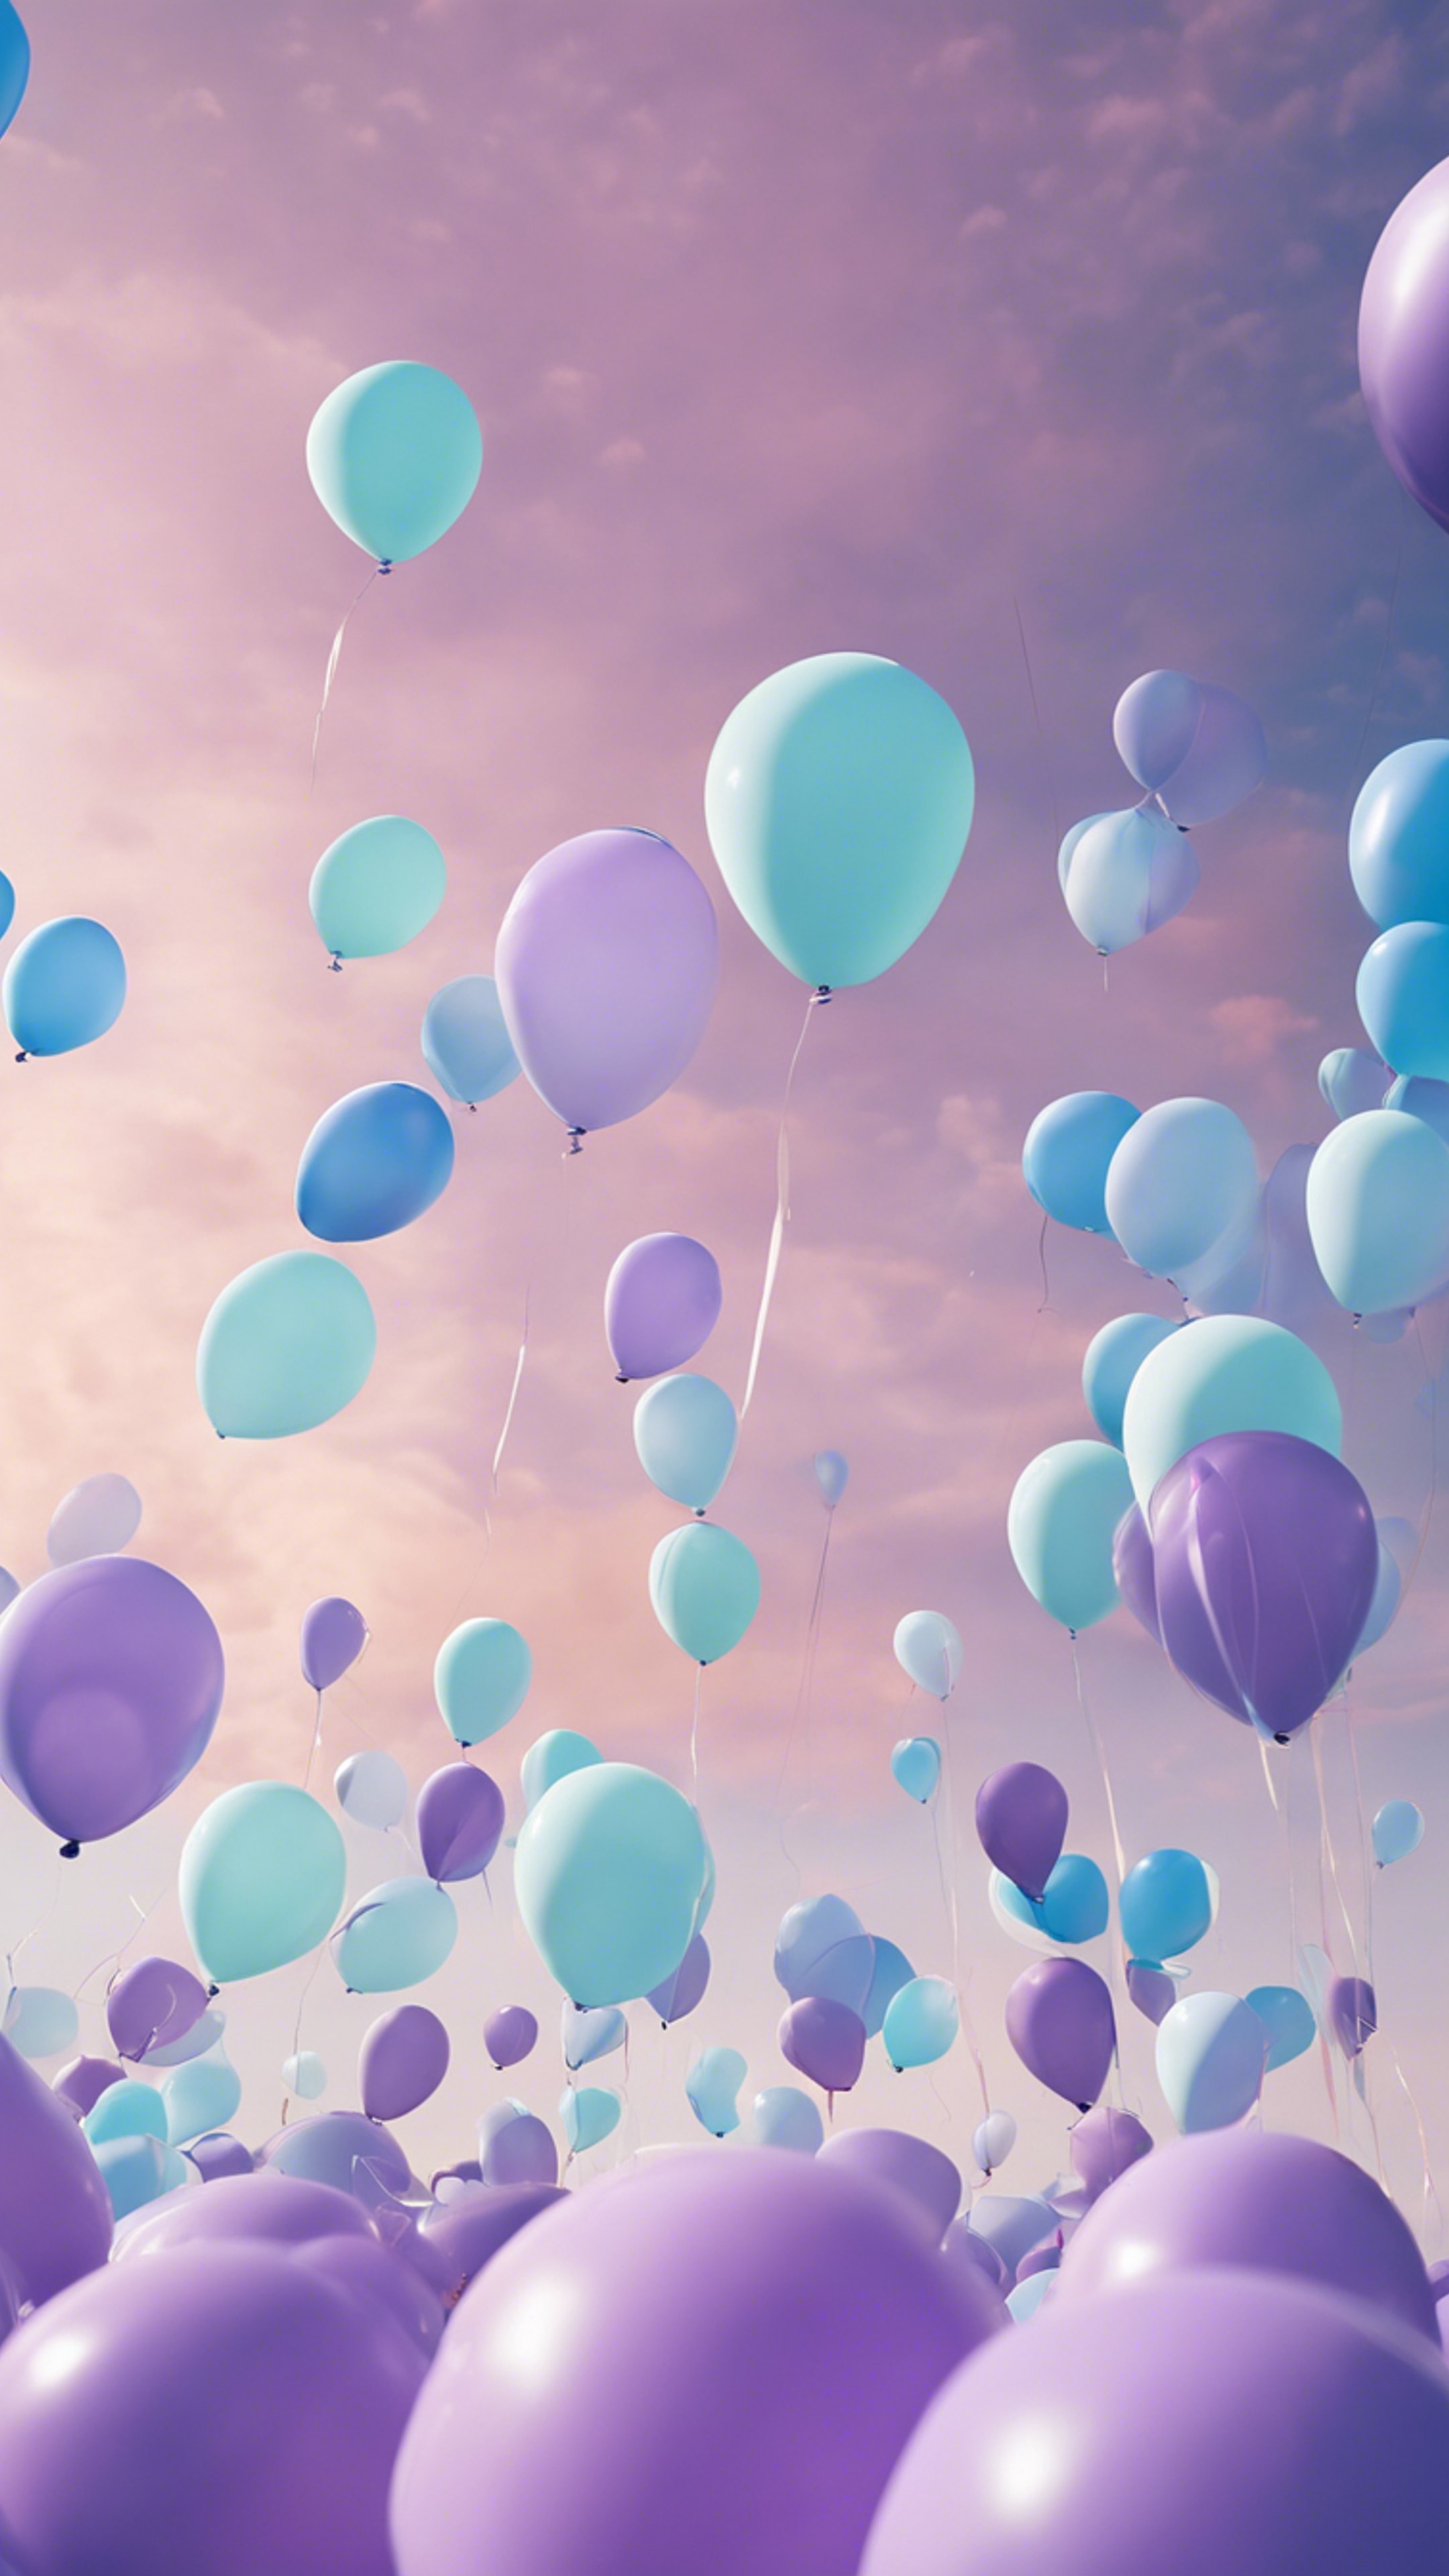 A whimsical scene of pastel purple and blue balloons filling the summer sky. Wallpaper[fd1f8f768f0047c48fb6]